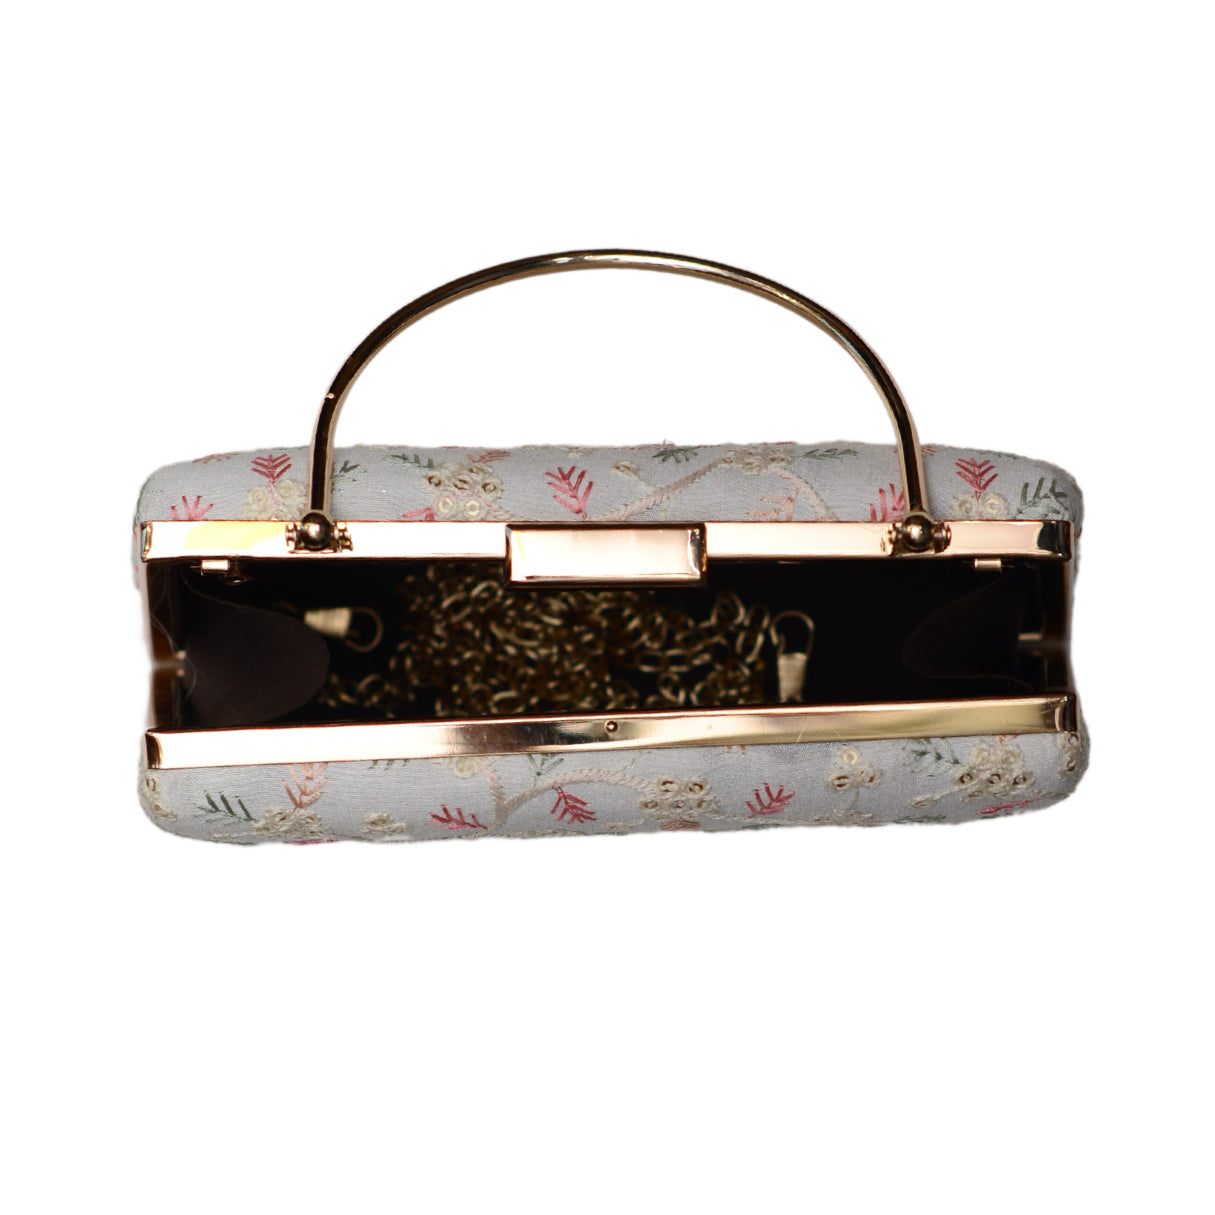 White Floral Thread Embroidery Party Clutch